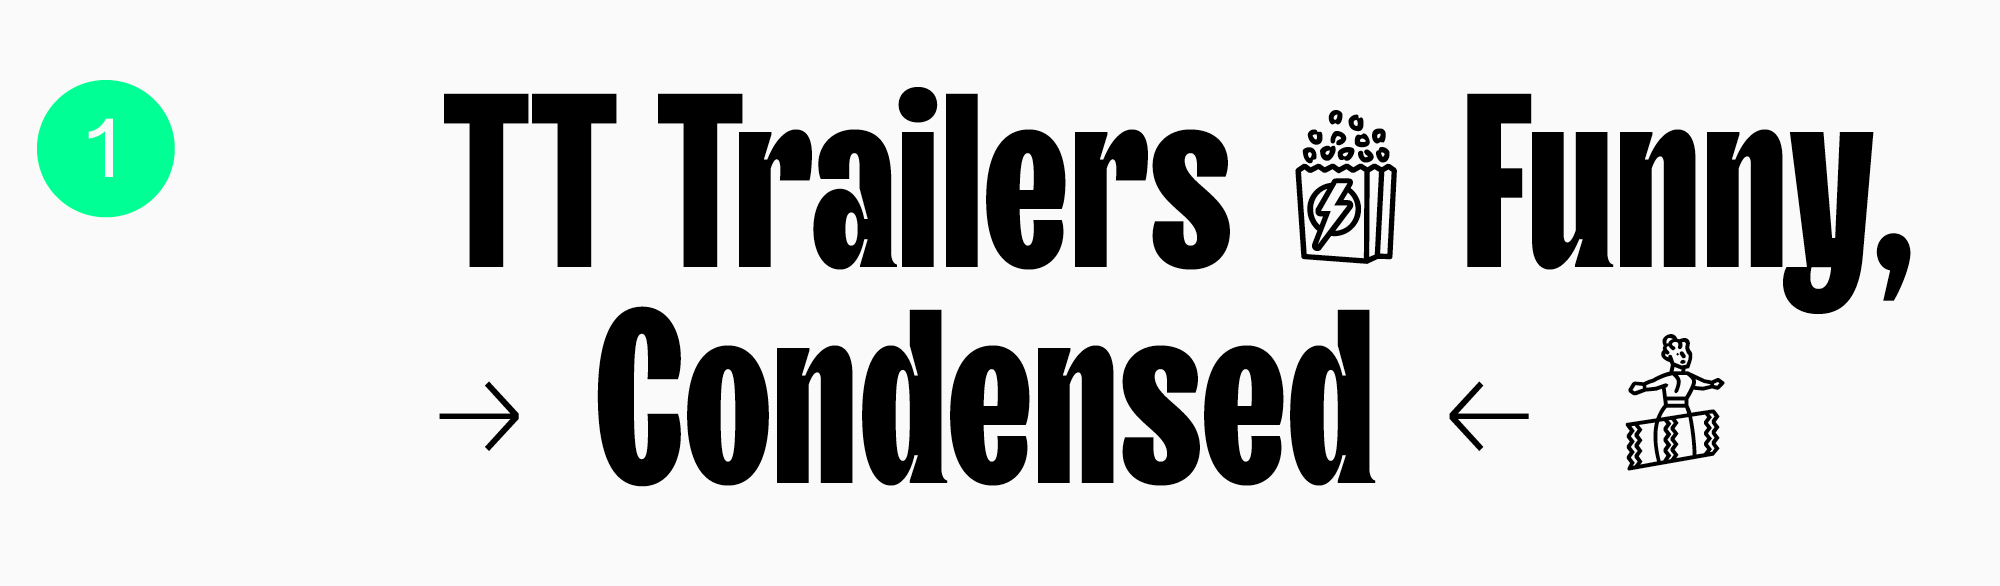 TT Trailers best font for posters